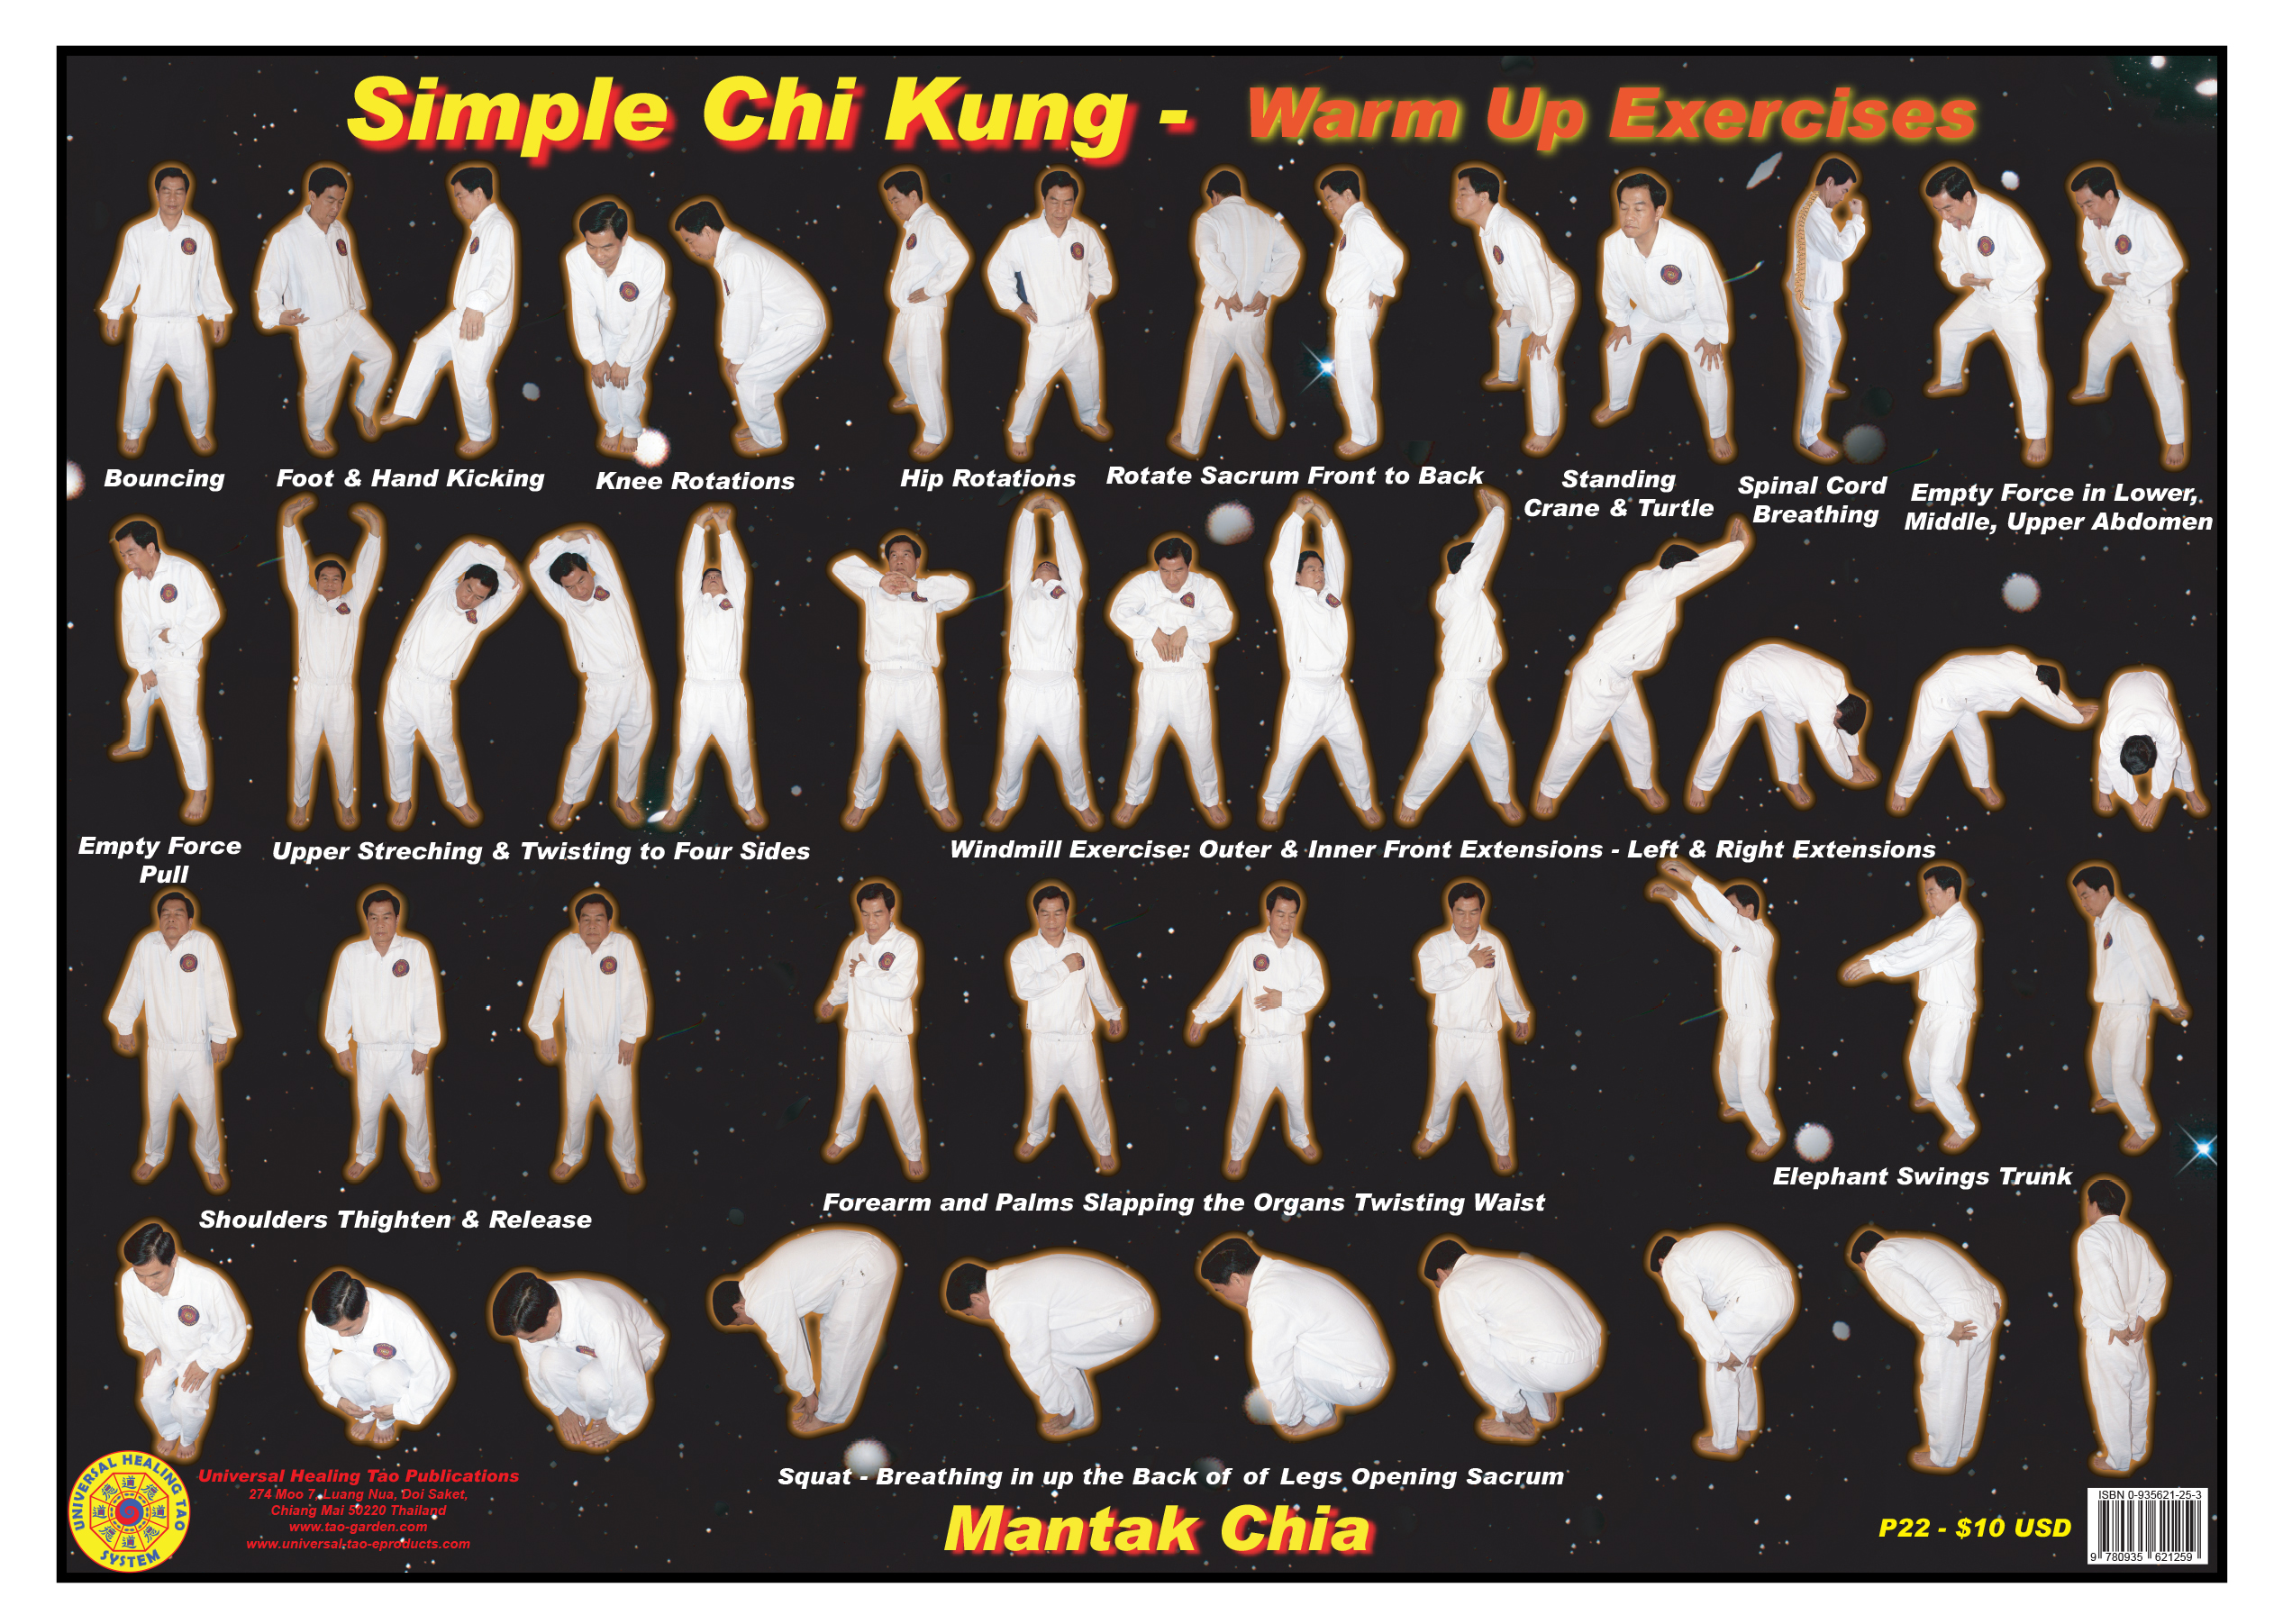 Simple Chi Kung (E-Poster) [DL-P22]